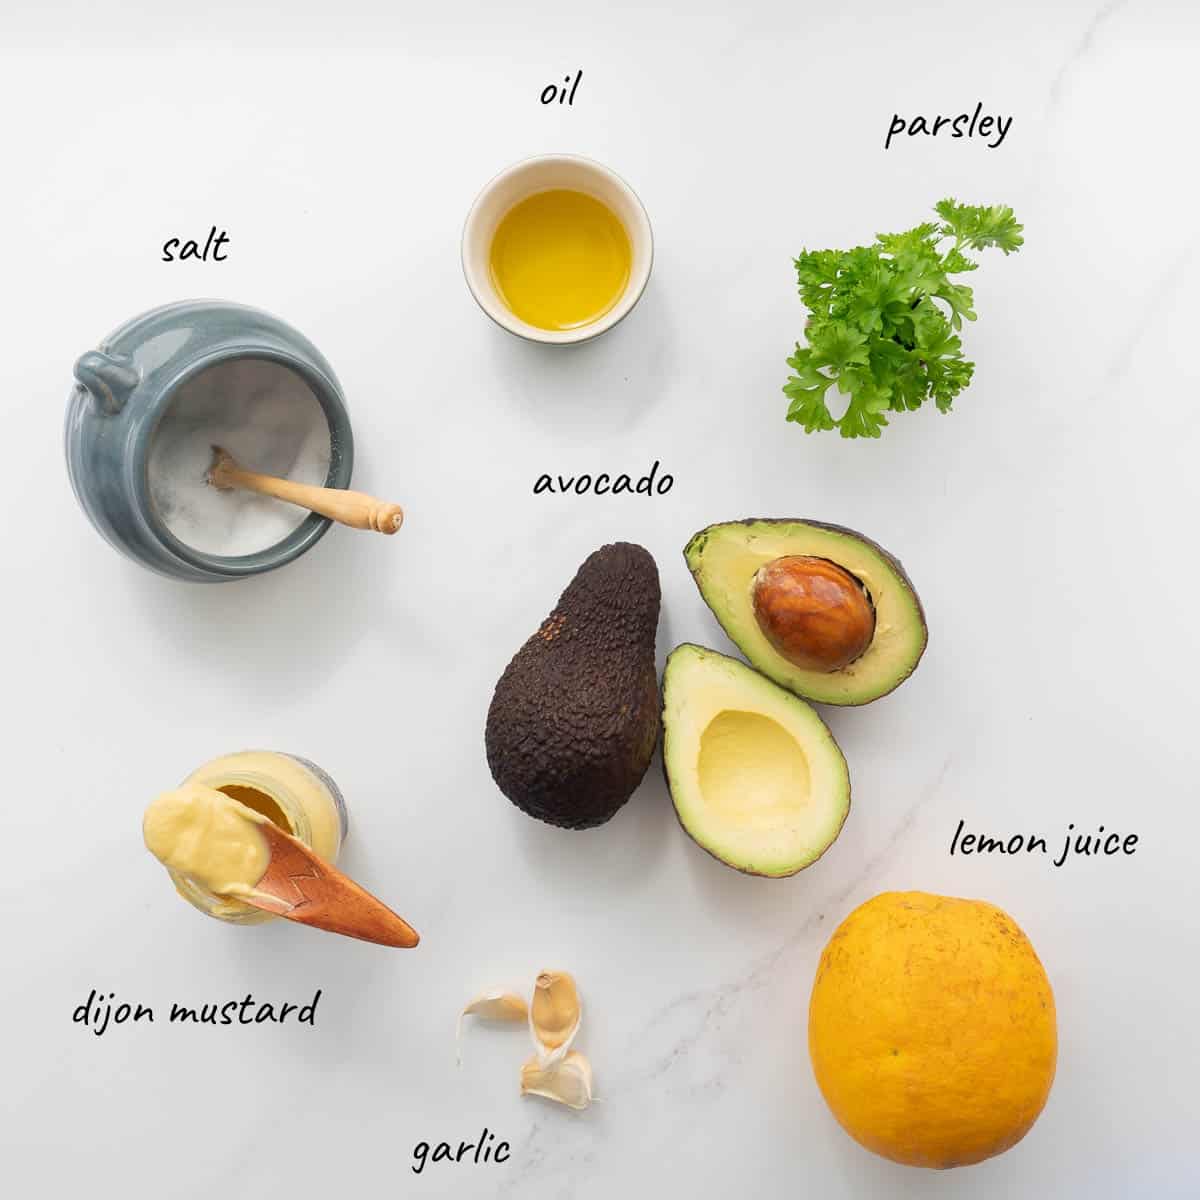 The ingredients to make avocado aioli laid out on a bench top with text overlay.